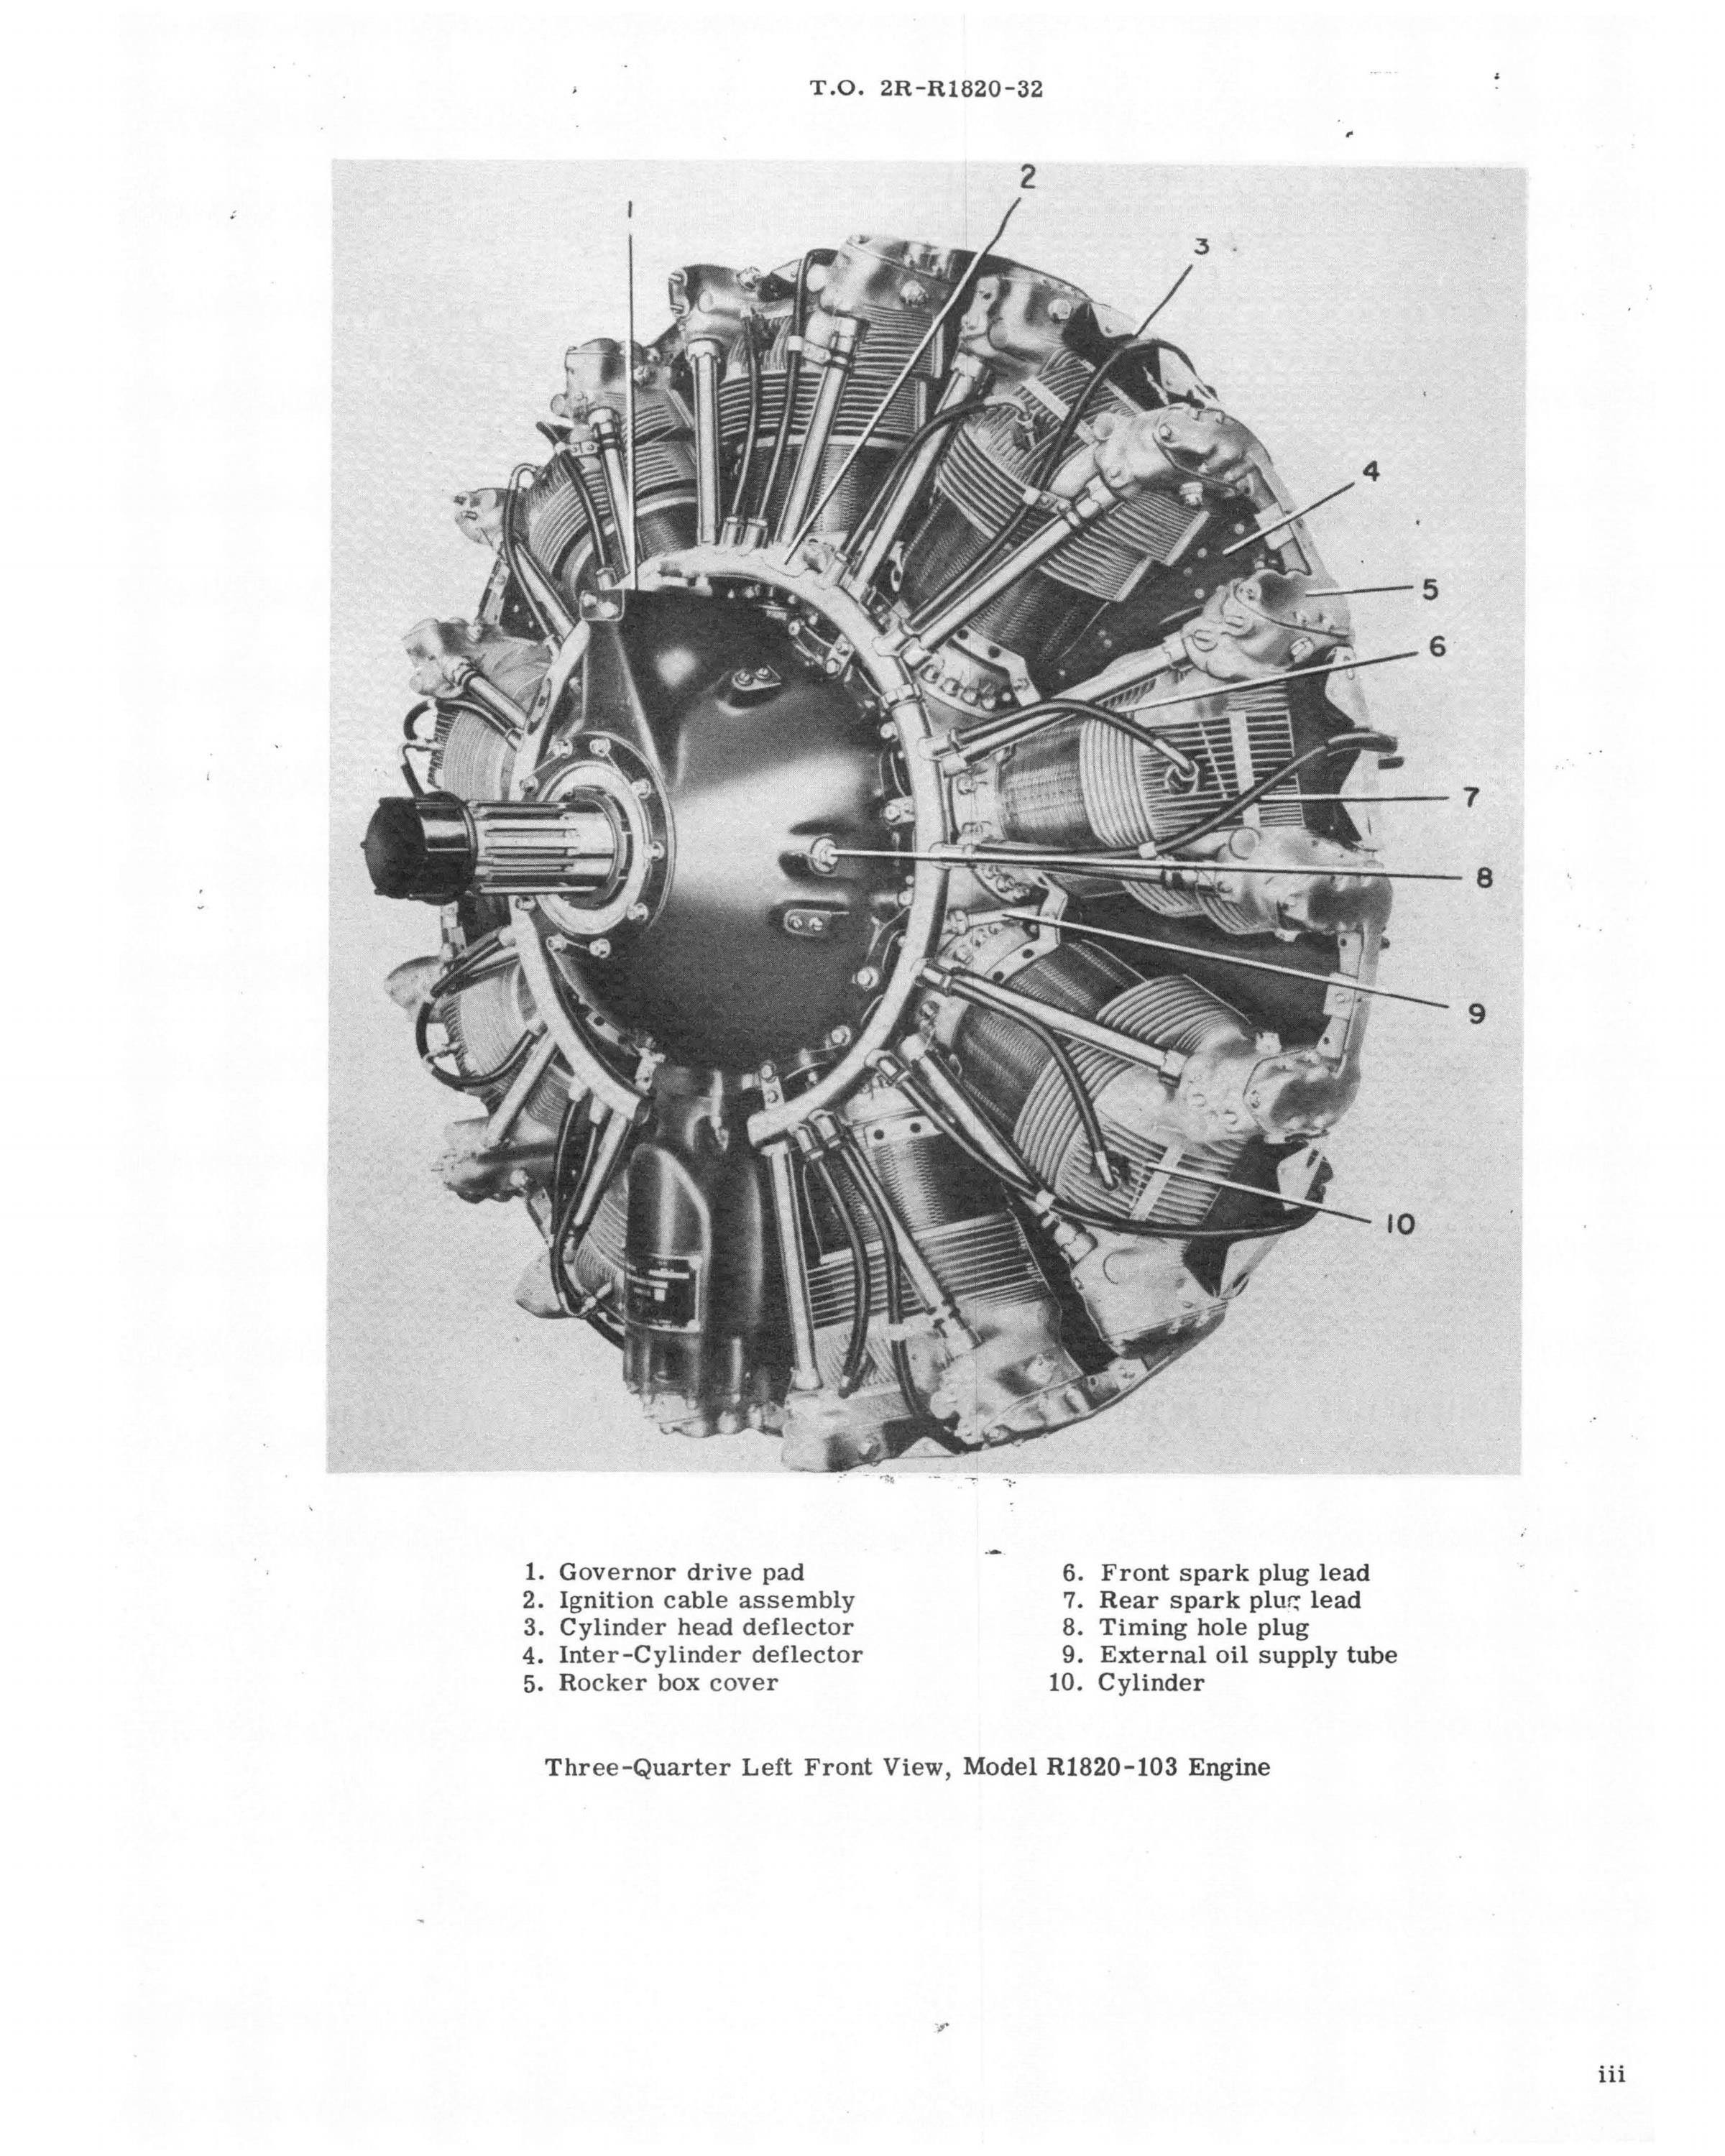 Sample page 5 from AirCorps Library document: Service Instructions for Model R-1820-103 Engine